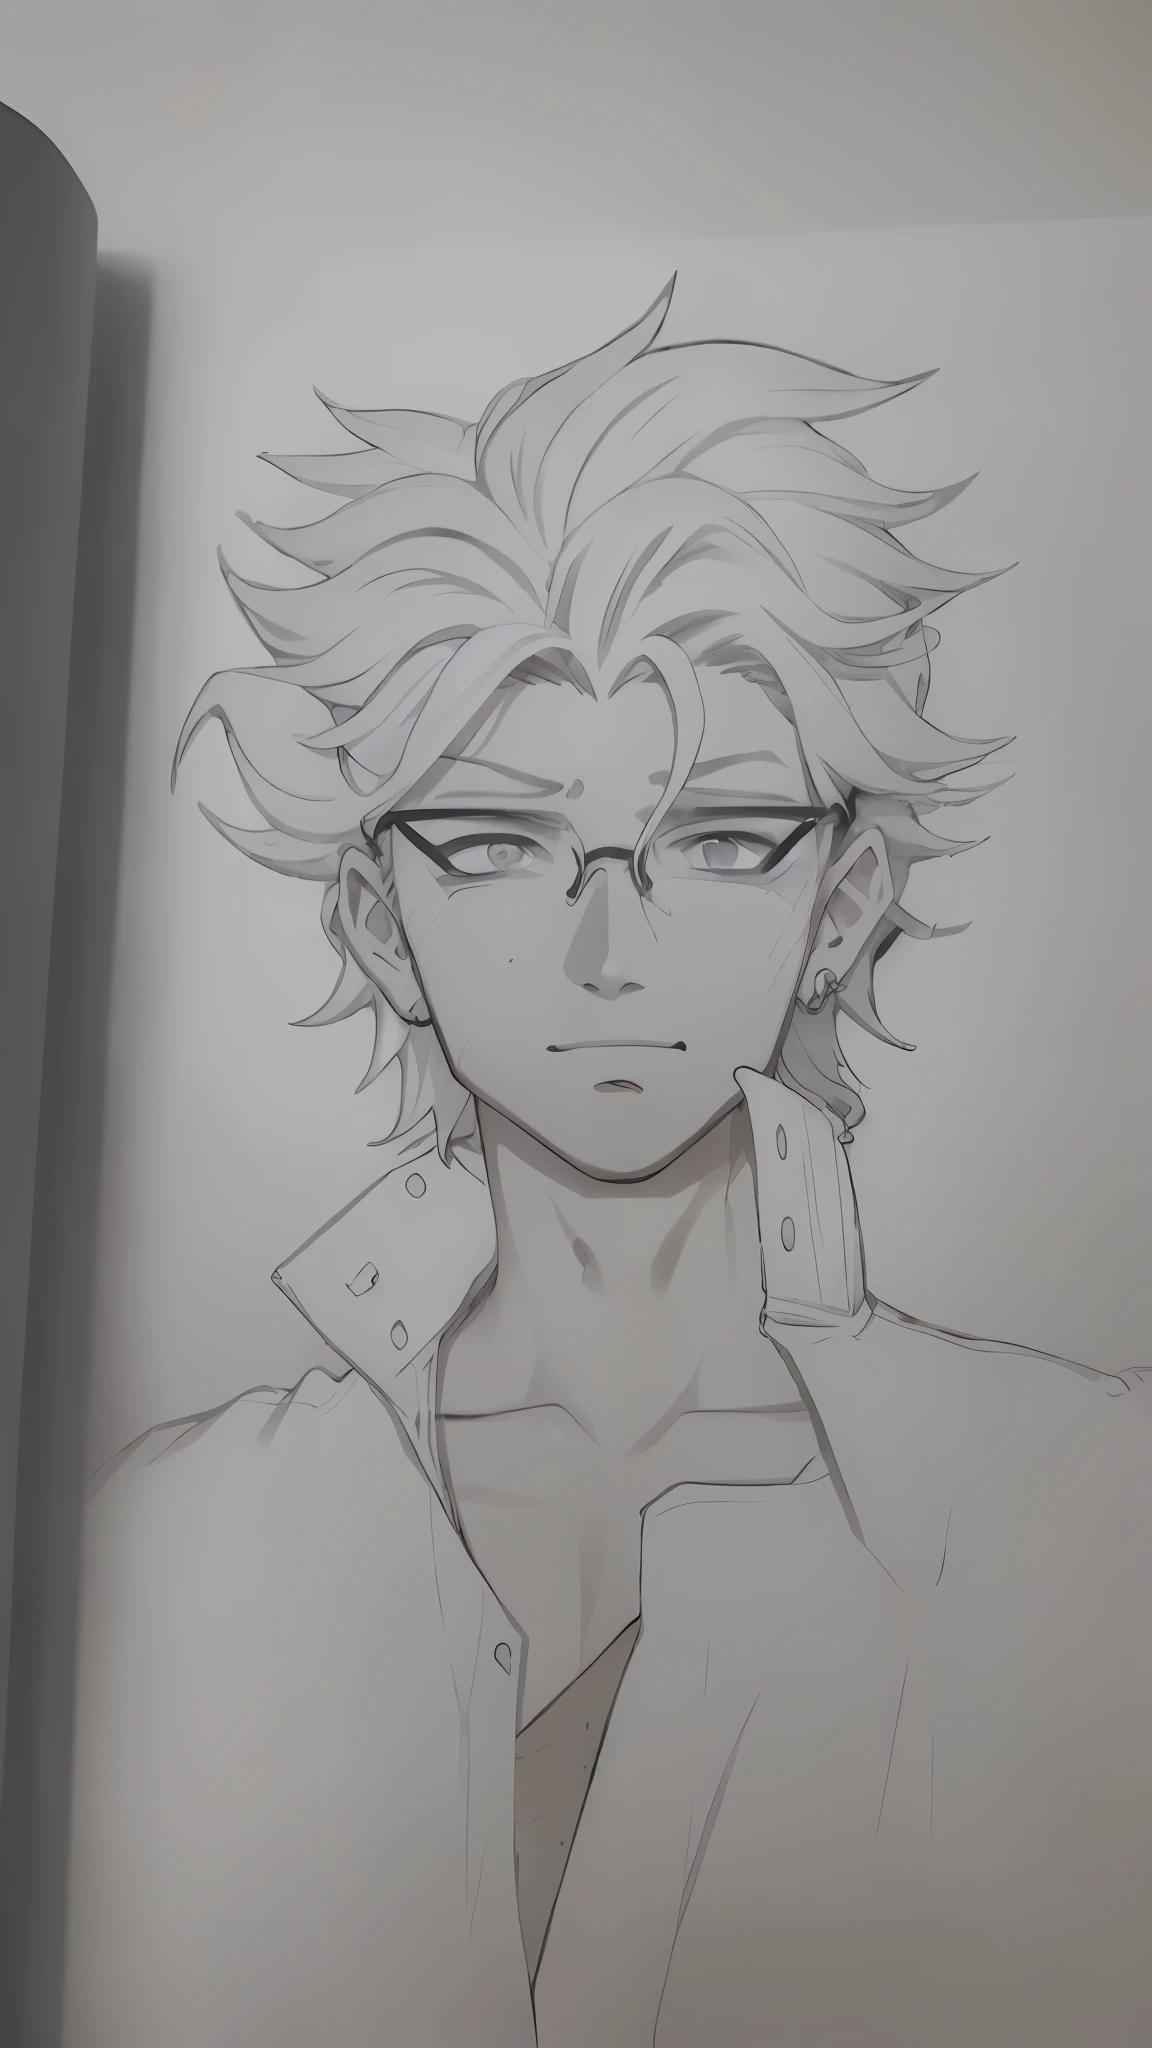 Drawing of a guy with glasses and tie in a book, trigger anime artstyle, um anime drawing, Jojo style anime, anime shading), a manga drawing, anime sketch, handsome guy in demon slayer art, anime shading, anime drawing, inspired by Okumura Masanobu, joseph joestar, Manga Drawing, male anime character, high quality fanart